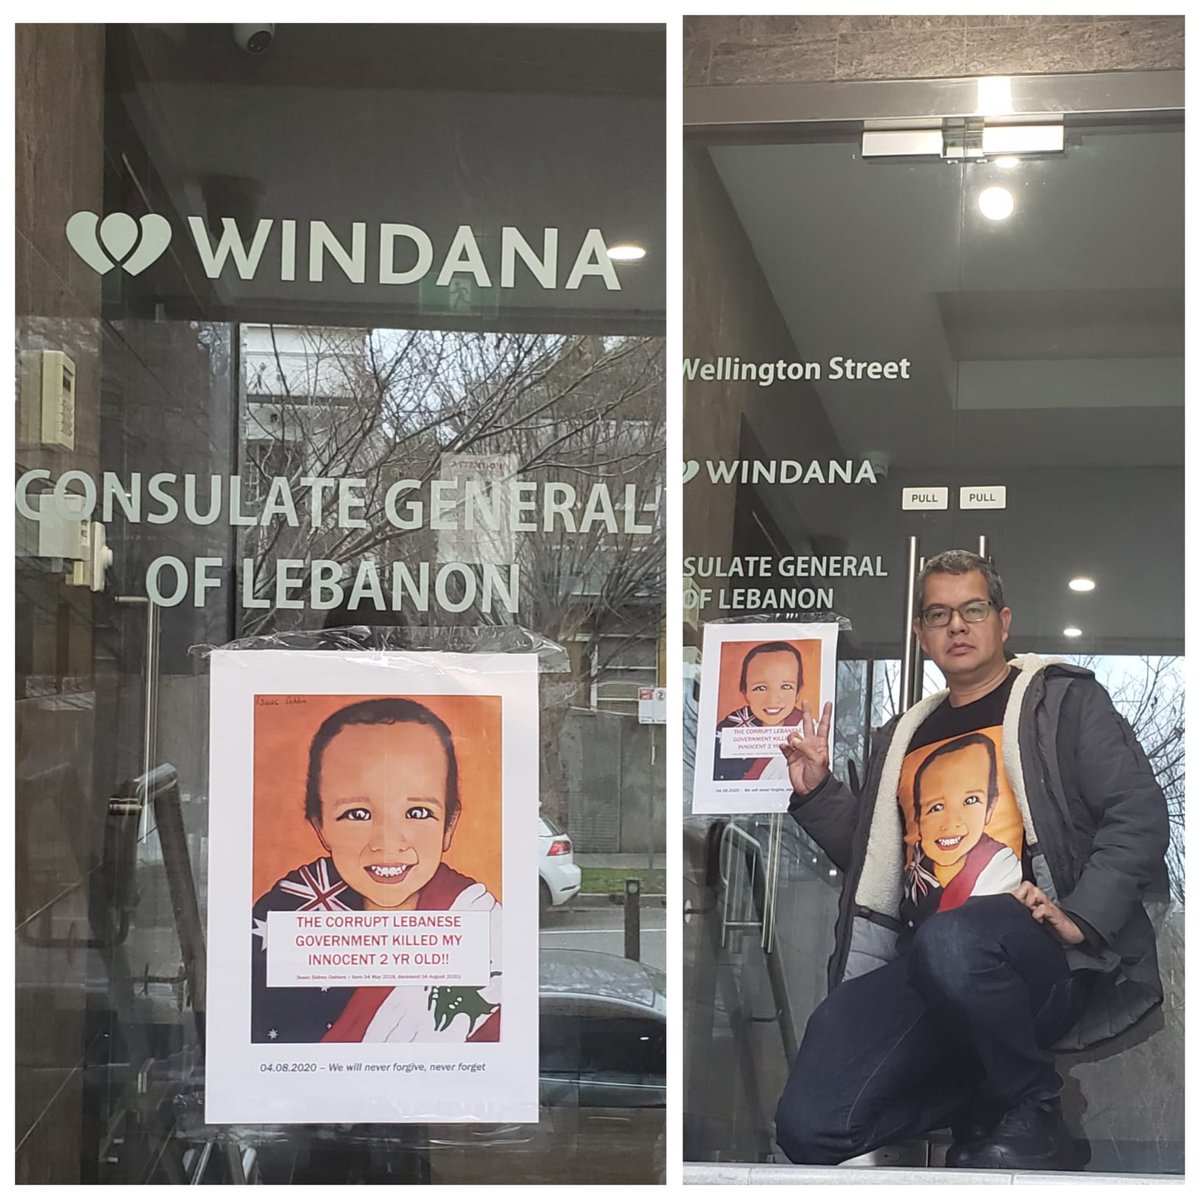 Three years ago on this day, I ran into a hospital in Beirut with my dying son in my arms after he was hurt in the #BeirutBlast.

I placed this poster at the Consulate of Lebanon in Melbourne to mark the anniversary of Isaac's death. 
Never forgive, never forget.
#BeirutExplosion